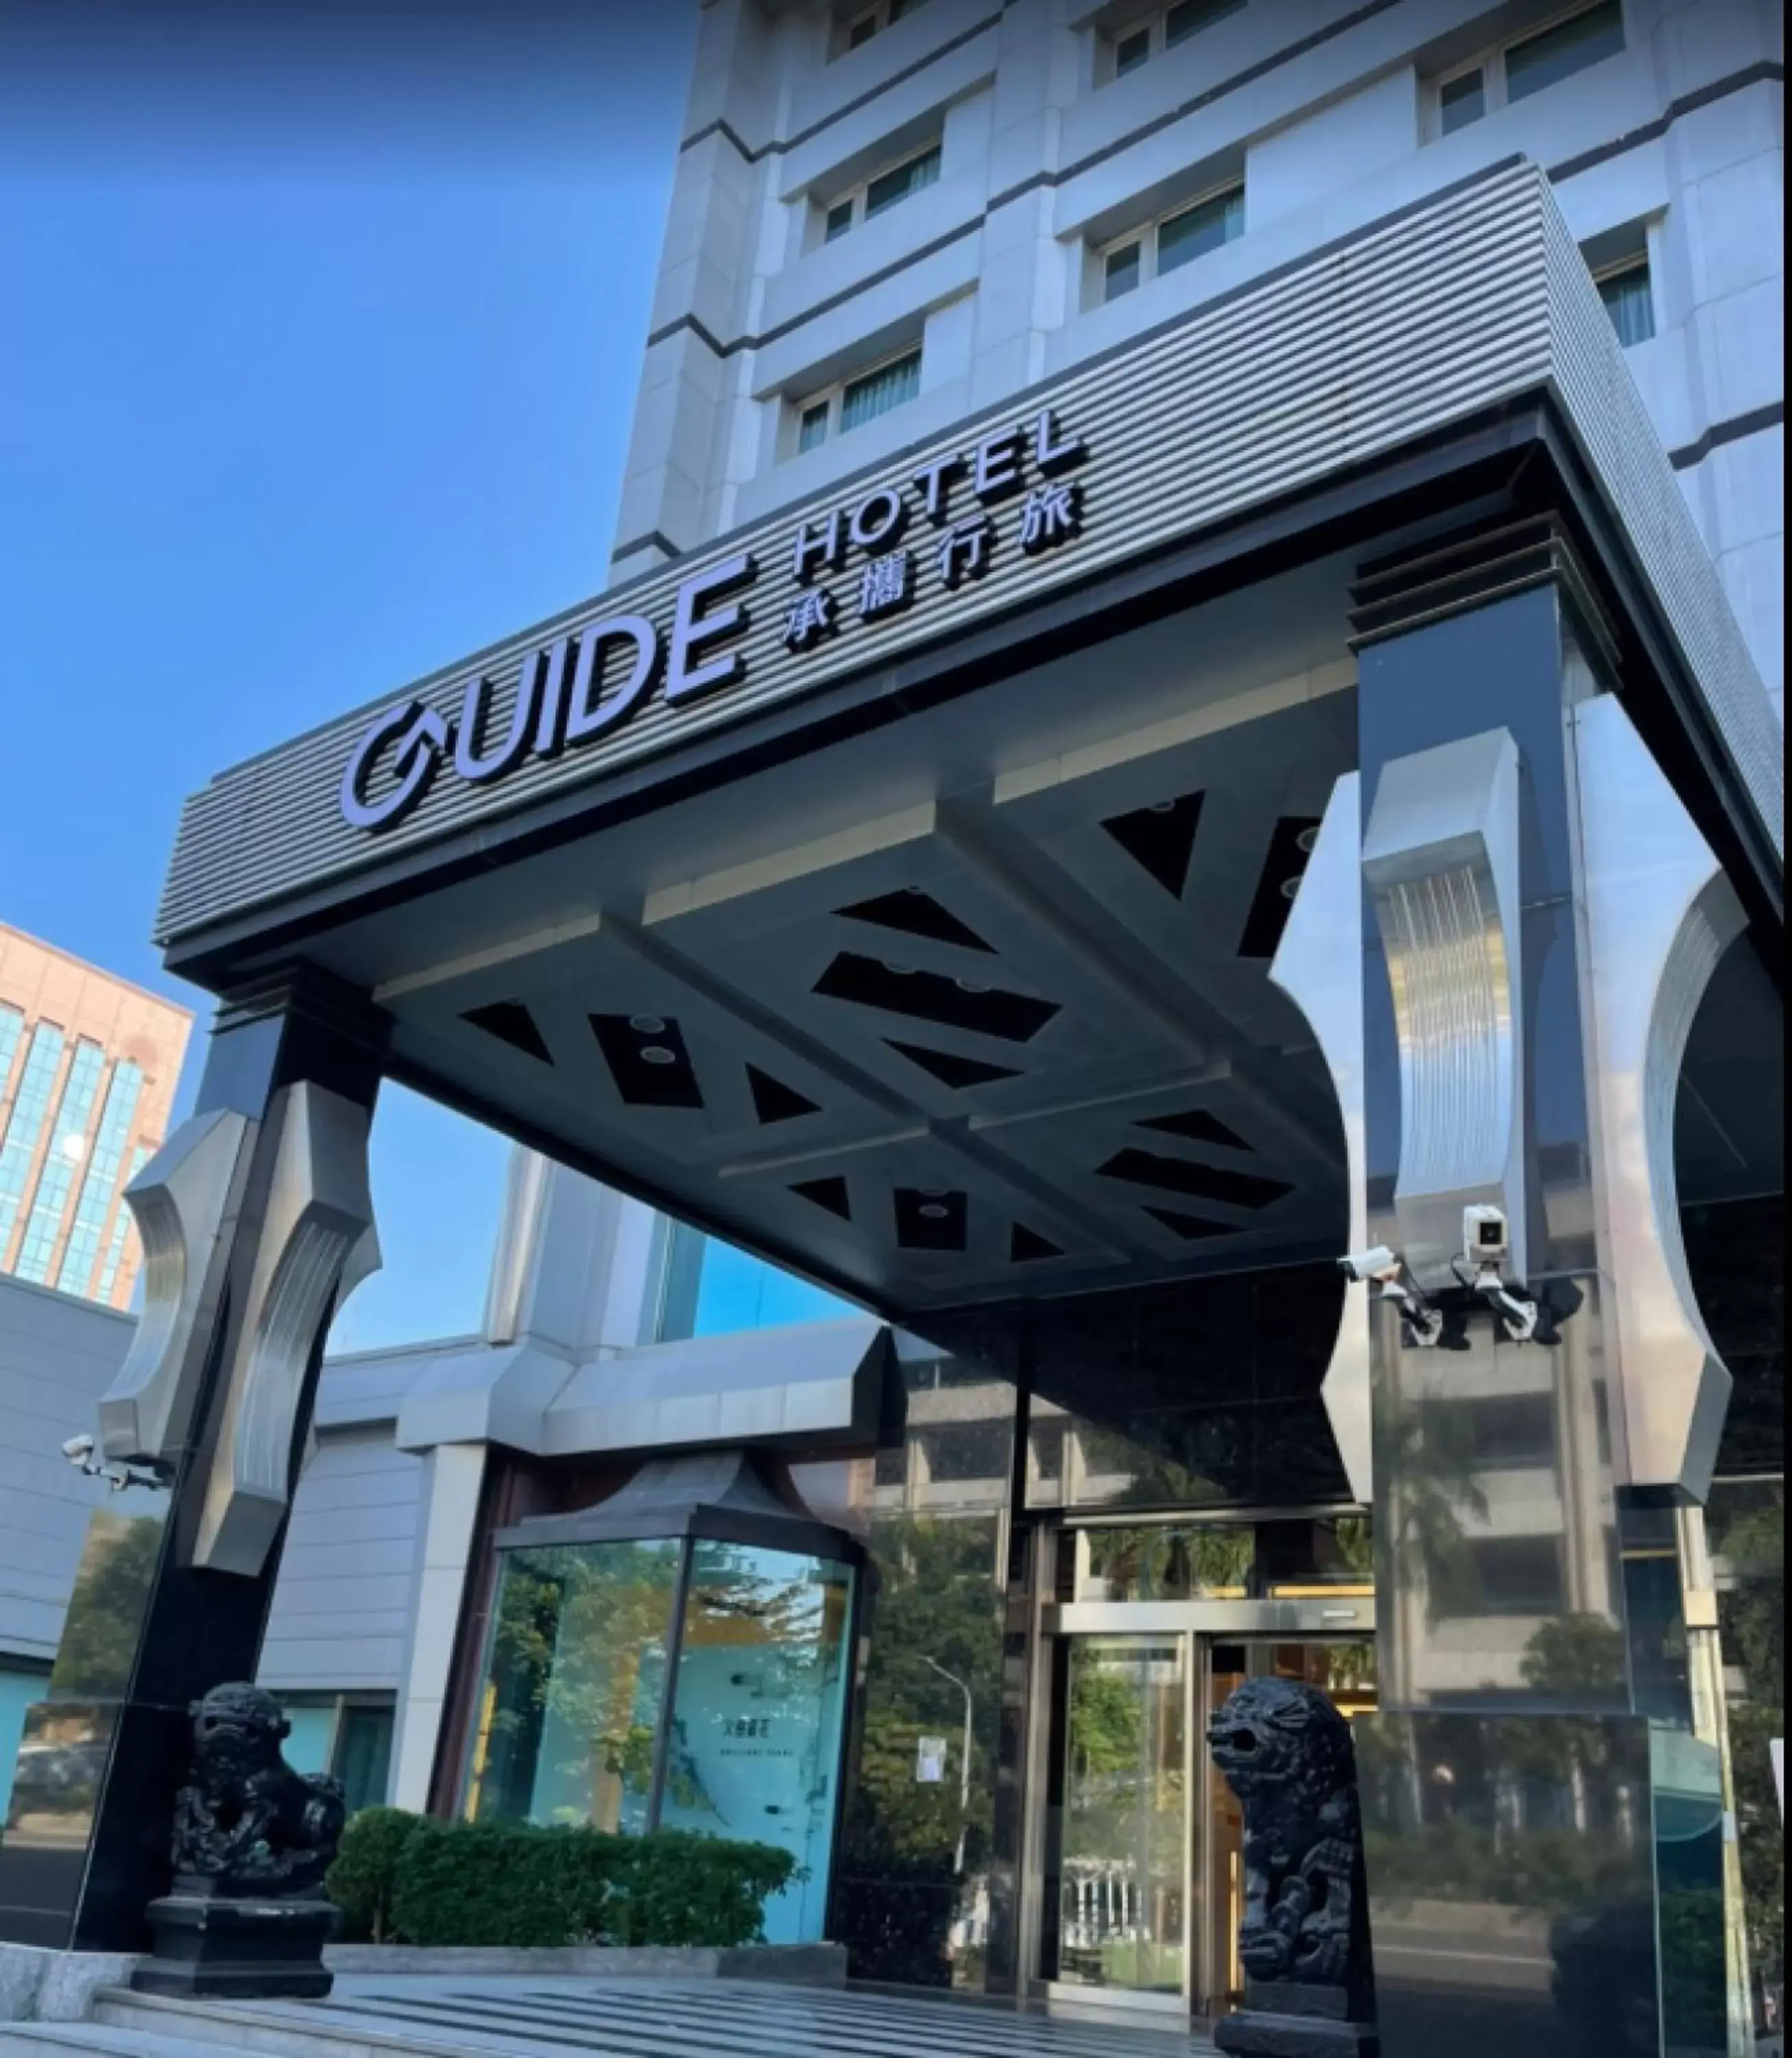 Property building in Guide Hotel Kaohsiung Liuhe